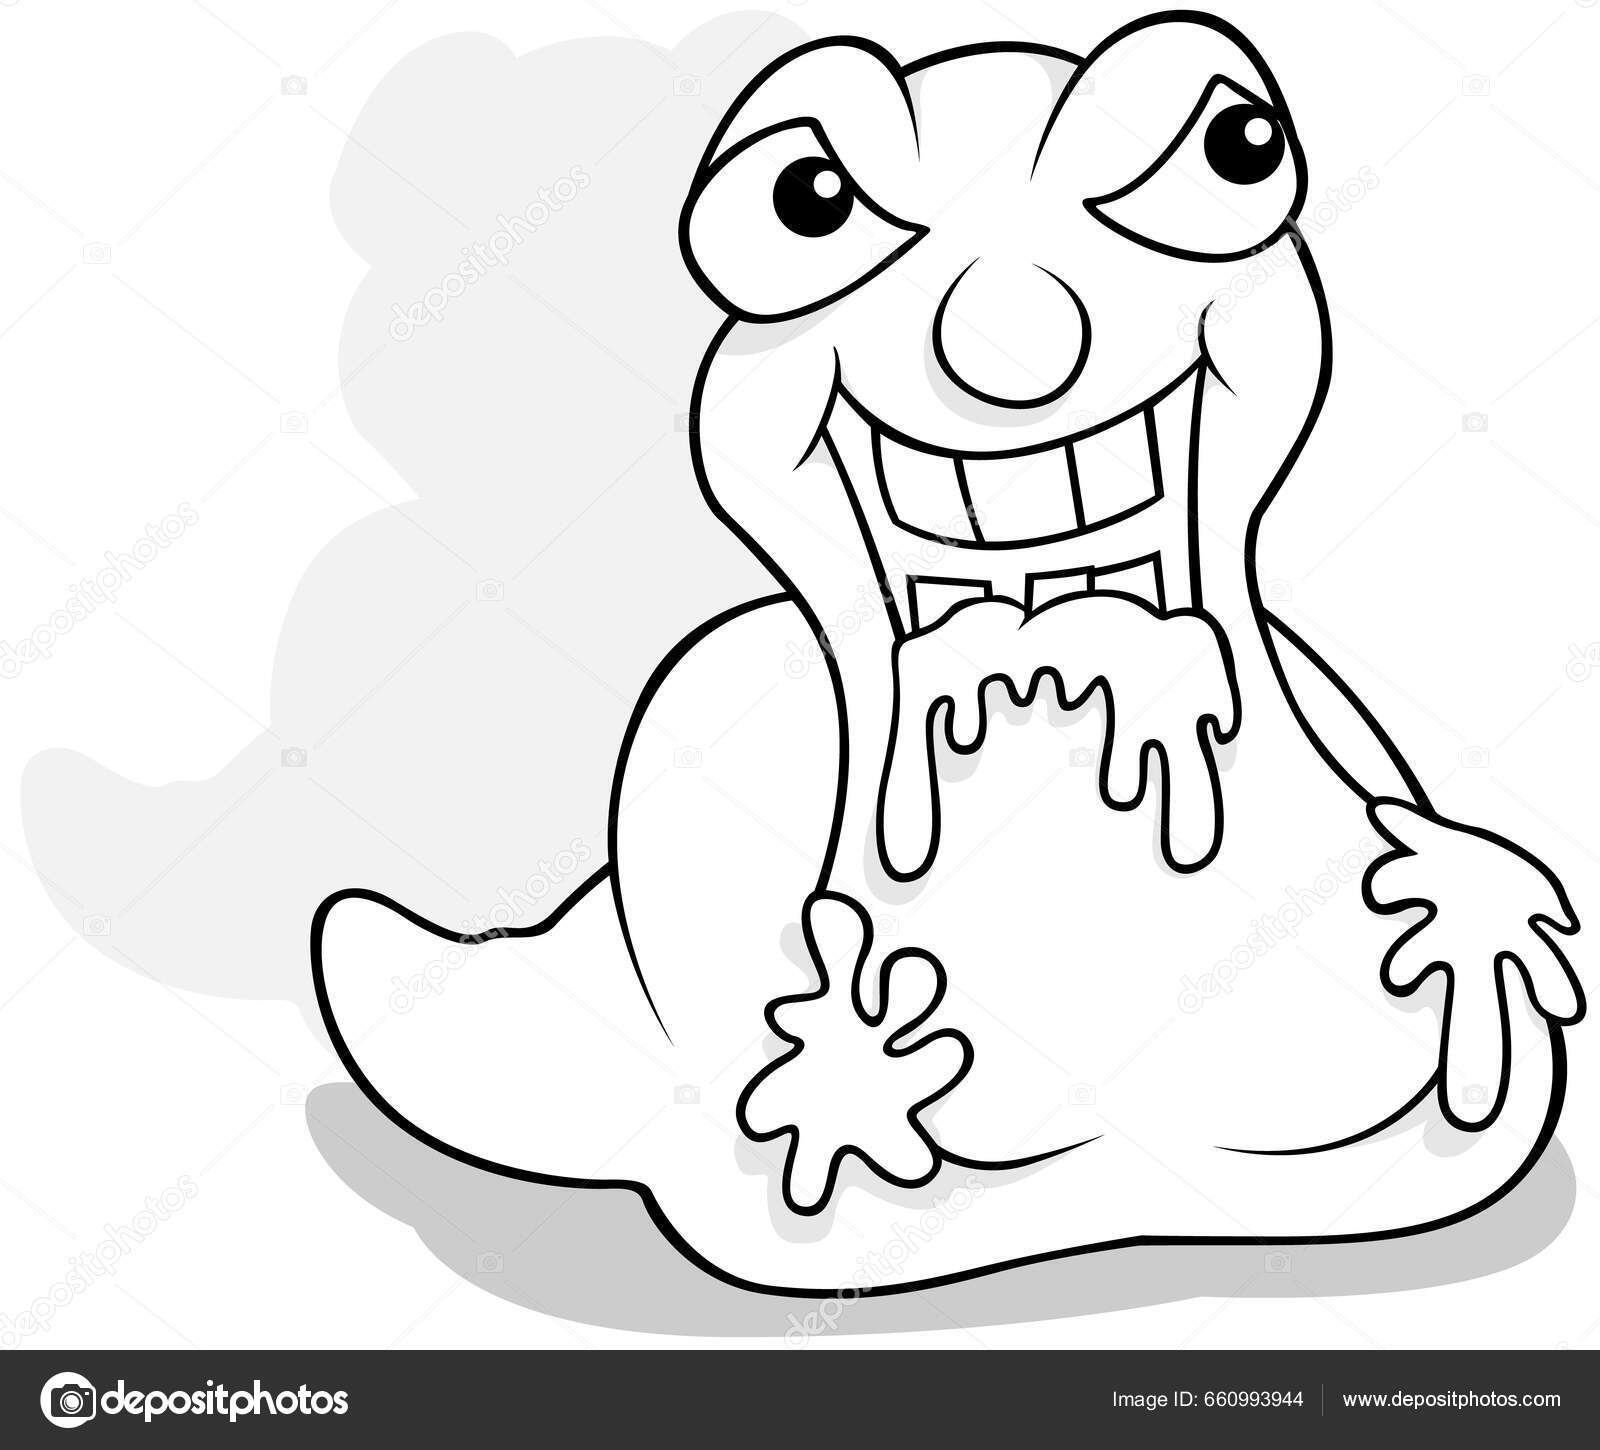 White slime Vectors & Illustrations for Free Download